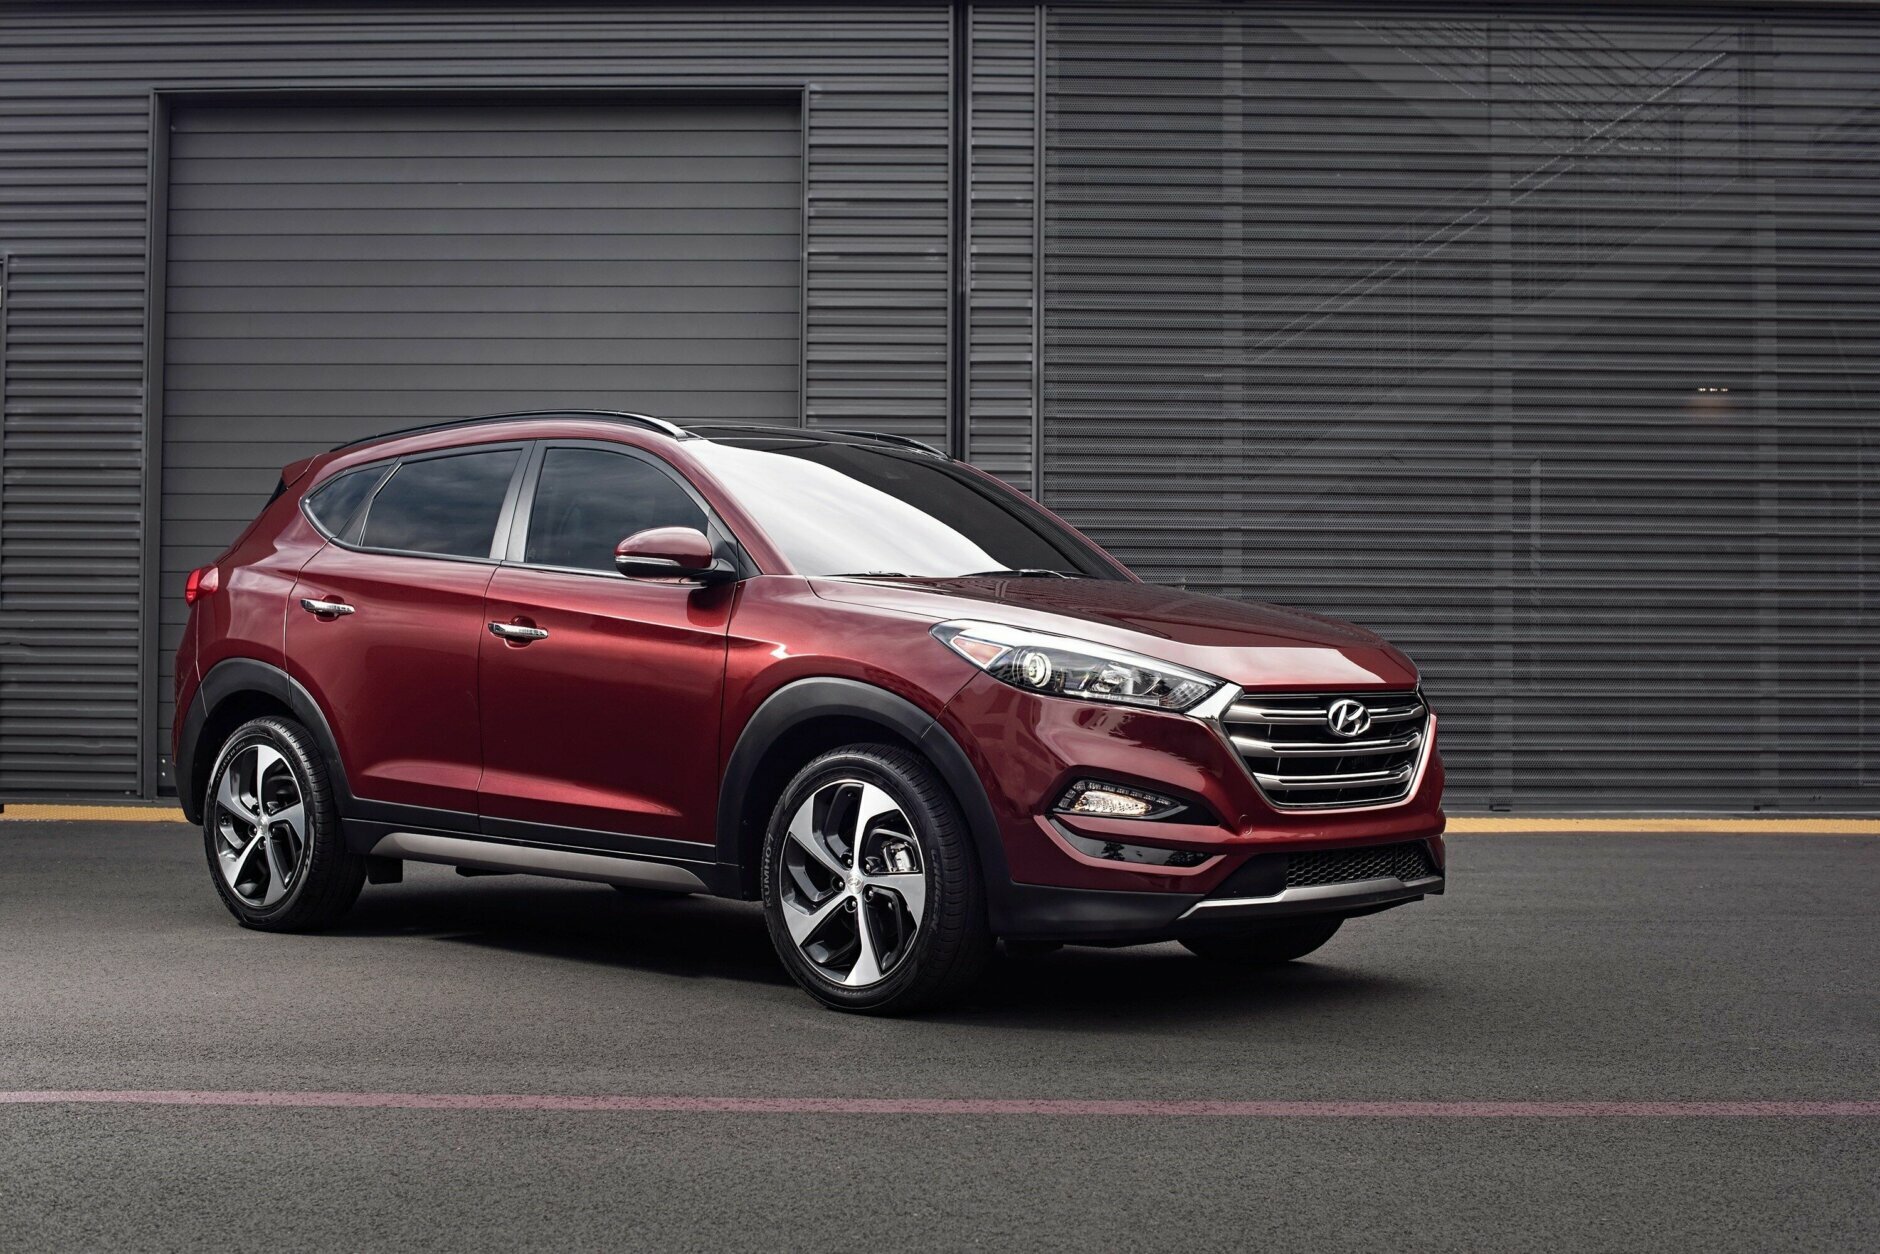 <p>Best used small SUV for teens: The 2017 Hyundai Tucson</p>
